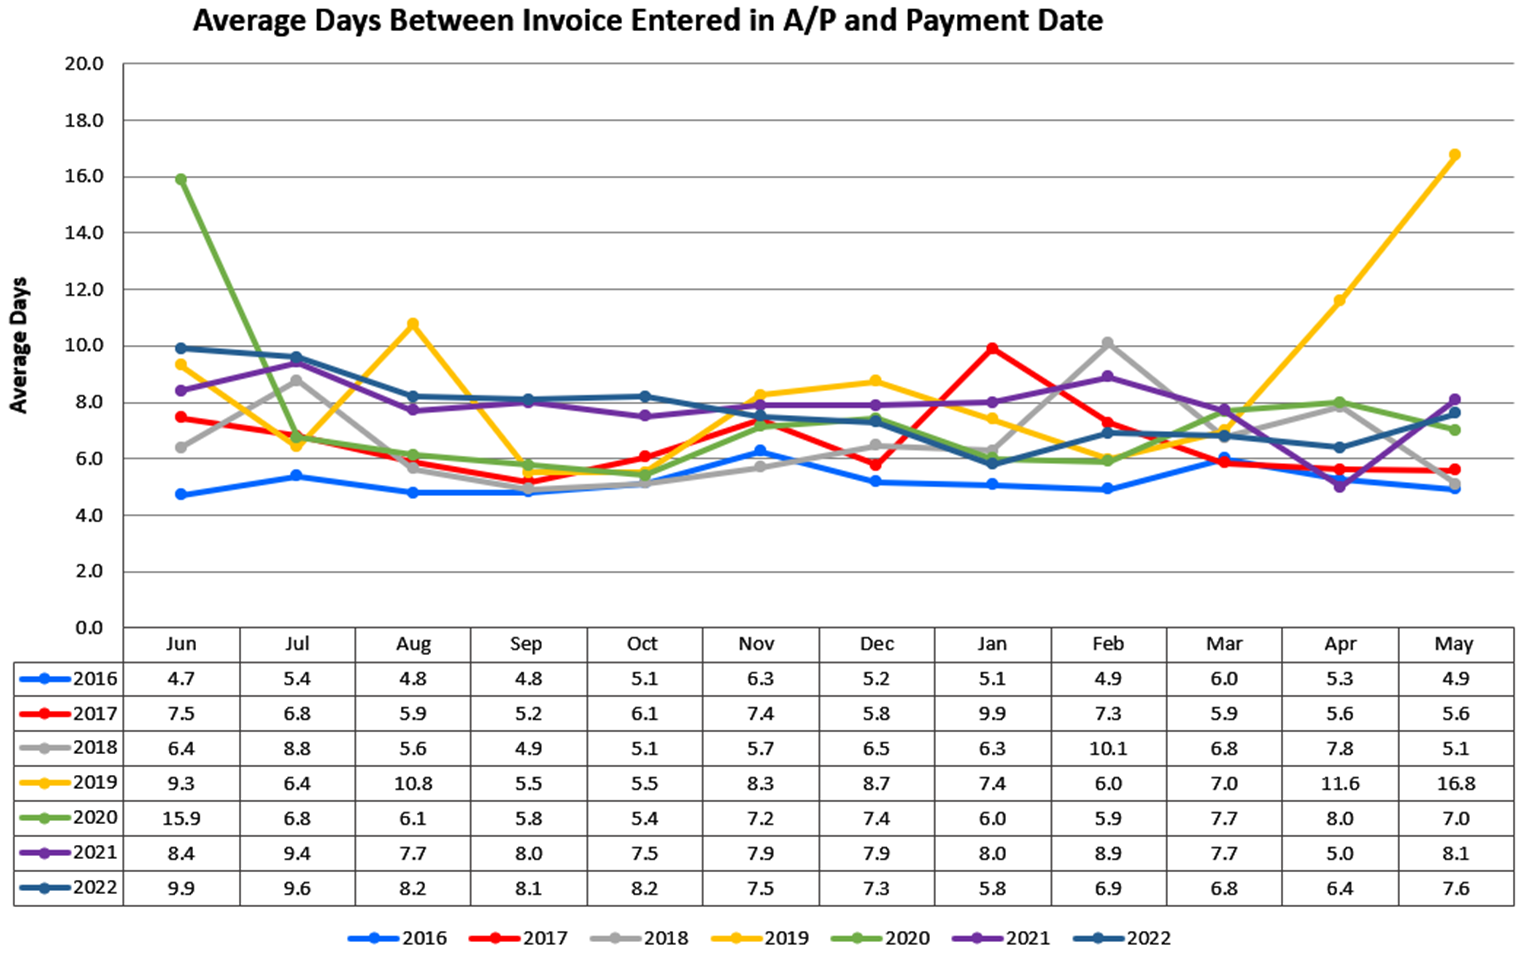 Average Days Between Invoice Entered in A/P and Payment Date